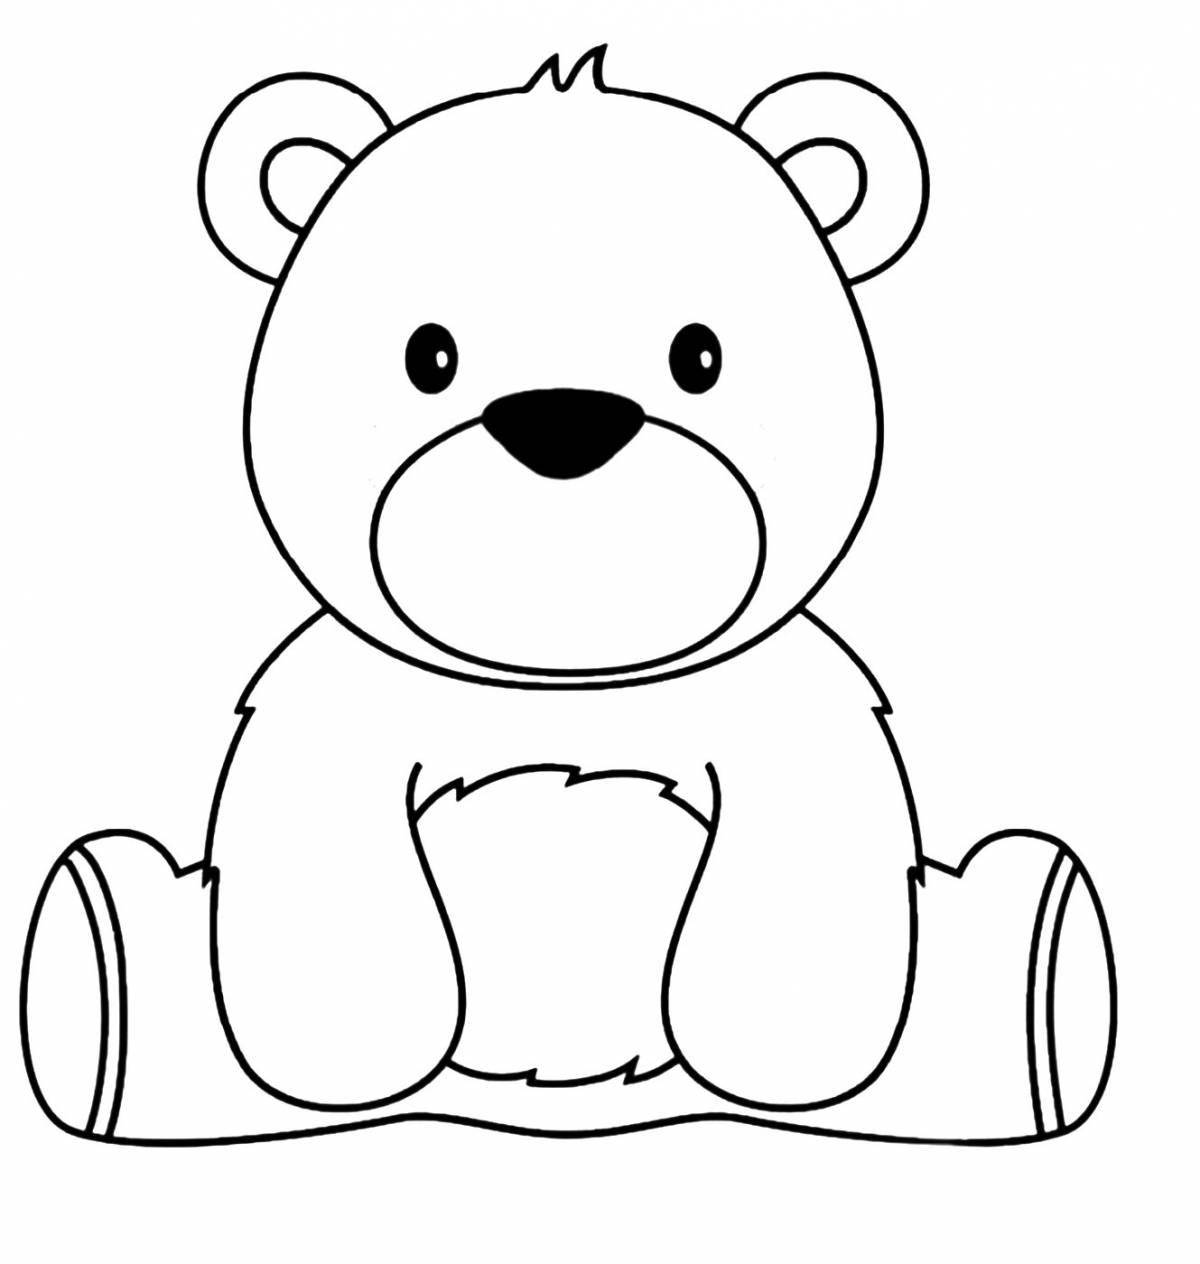 Naughty bear coloring book for kids